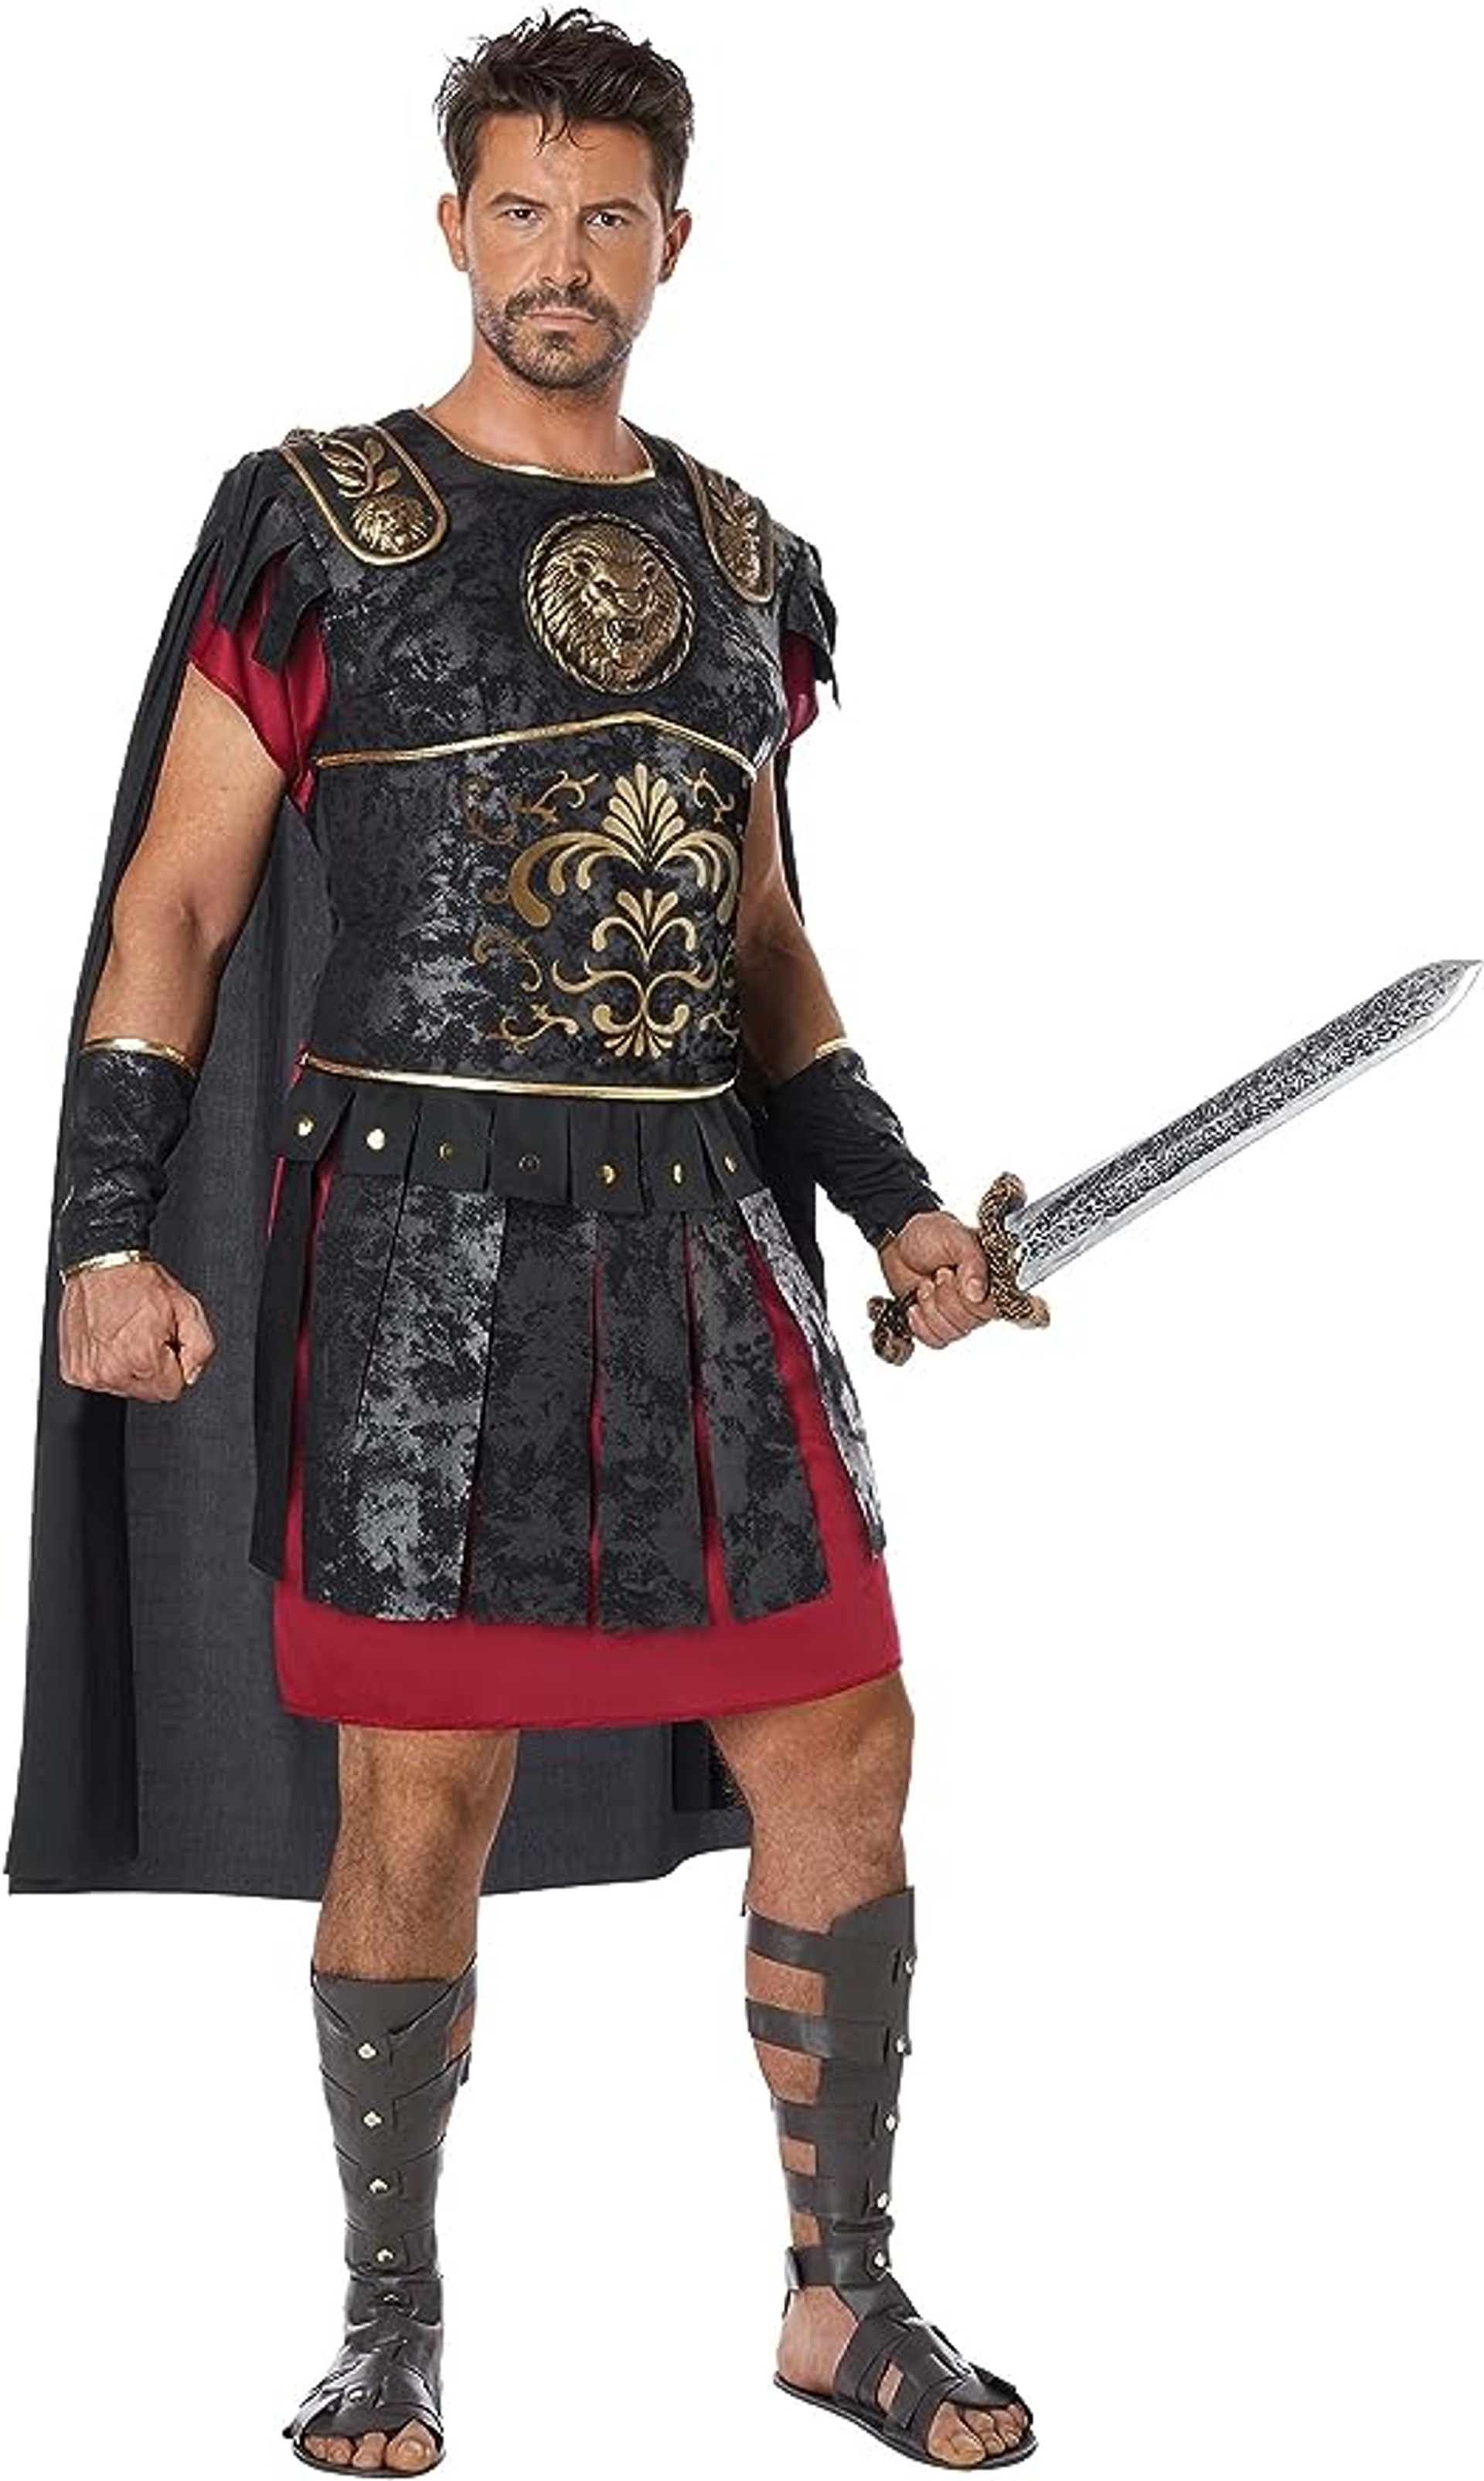 Buy Mens Costume for Halloween & More at Fantasy Costumes Chicago